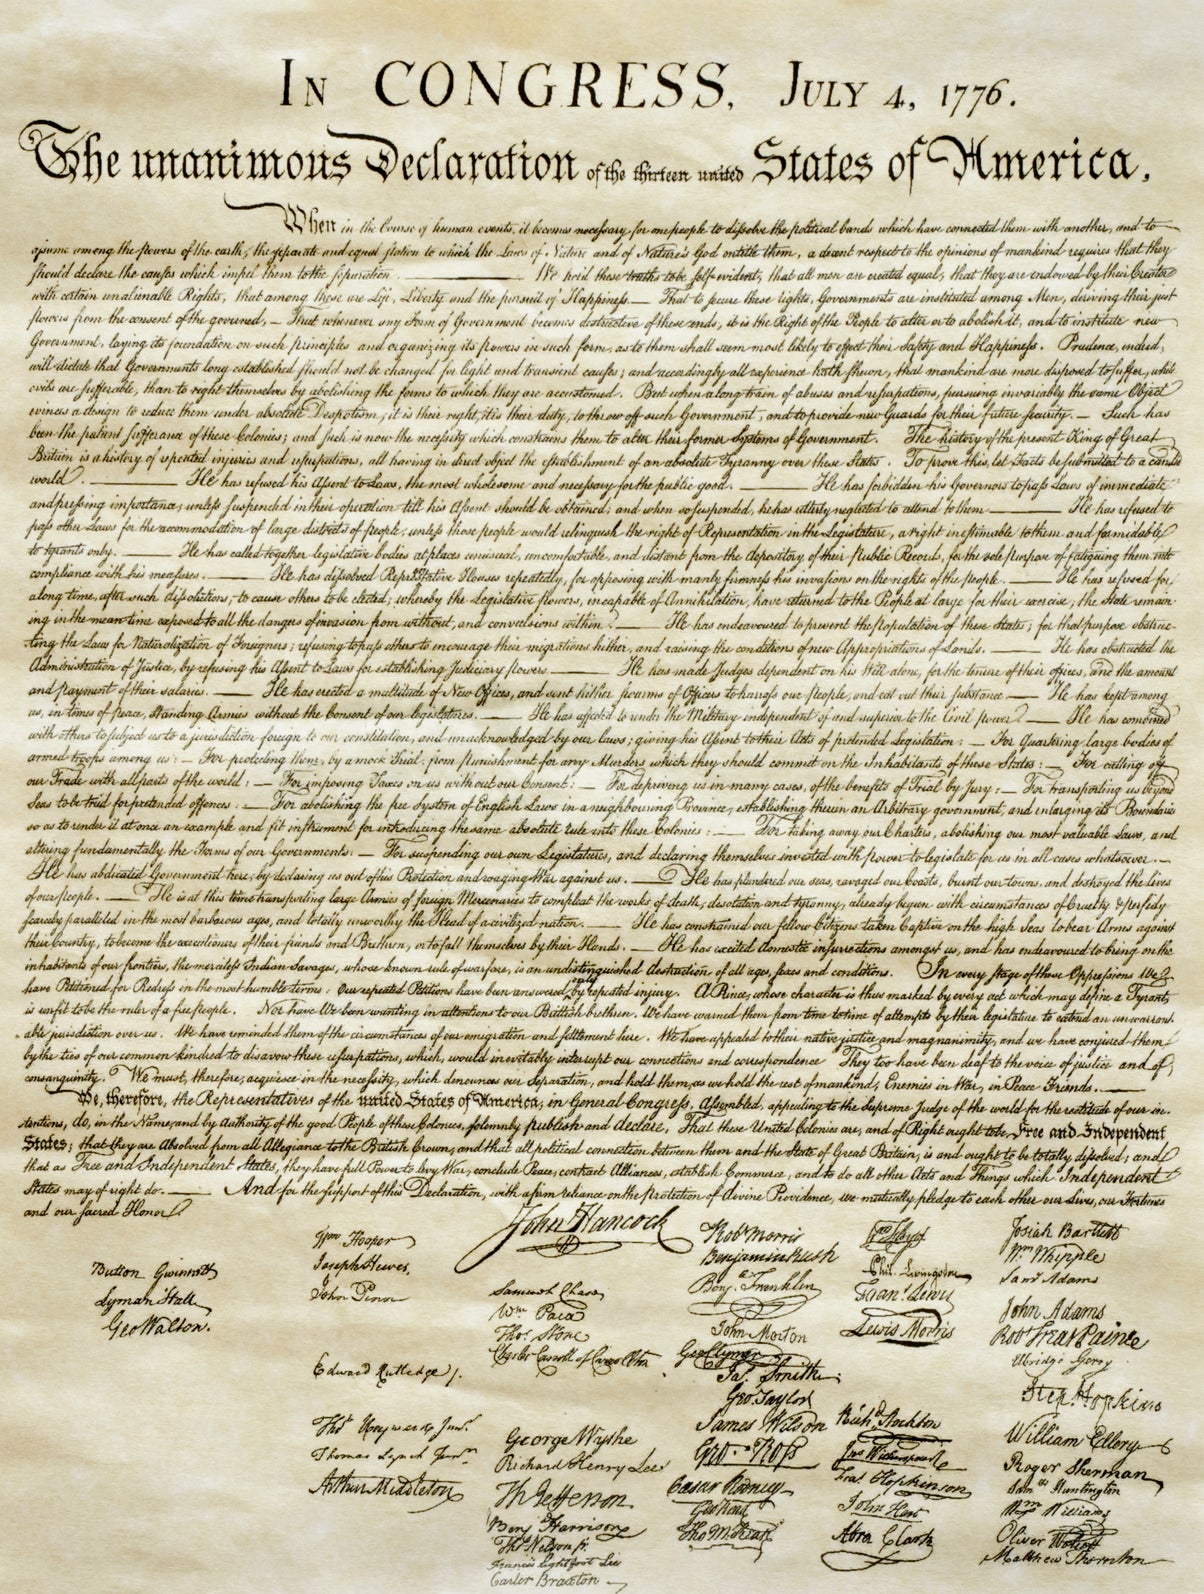 The Paradox of the Declaration of - The